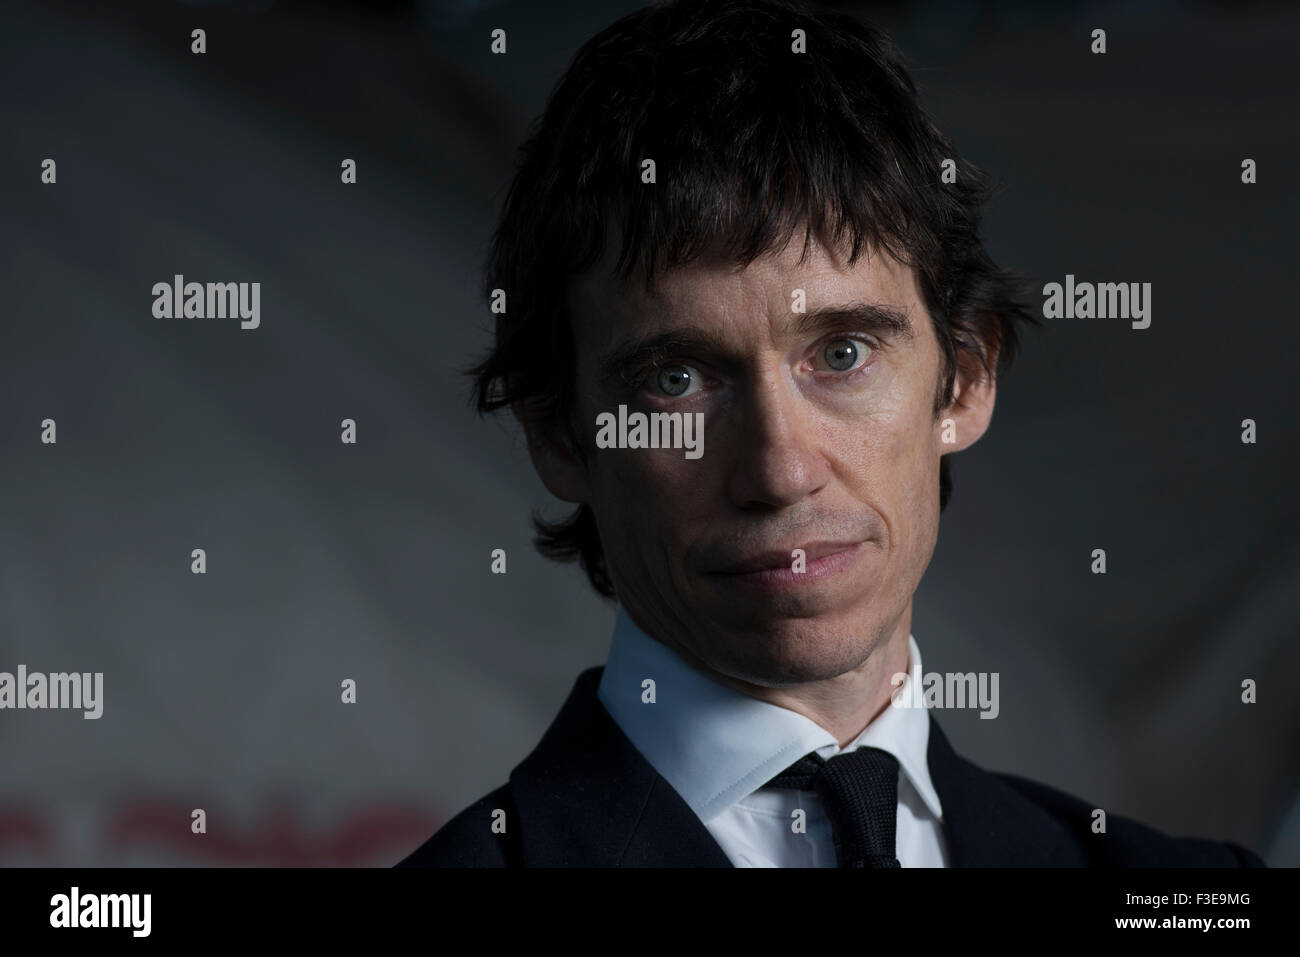 British academic, author, diplomat, documentary maker and Conservative politician Rory Stewart OBE, FRSL. Stock Photo